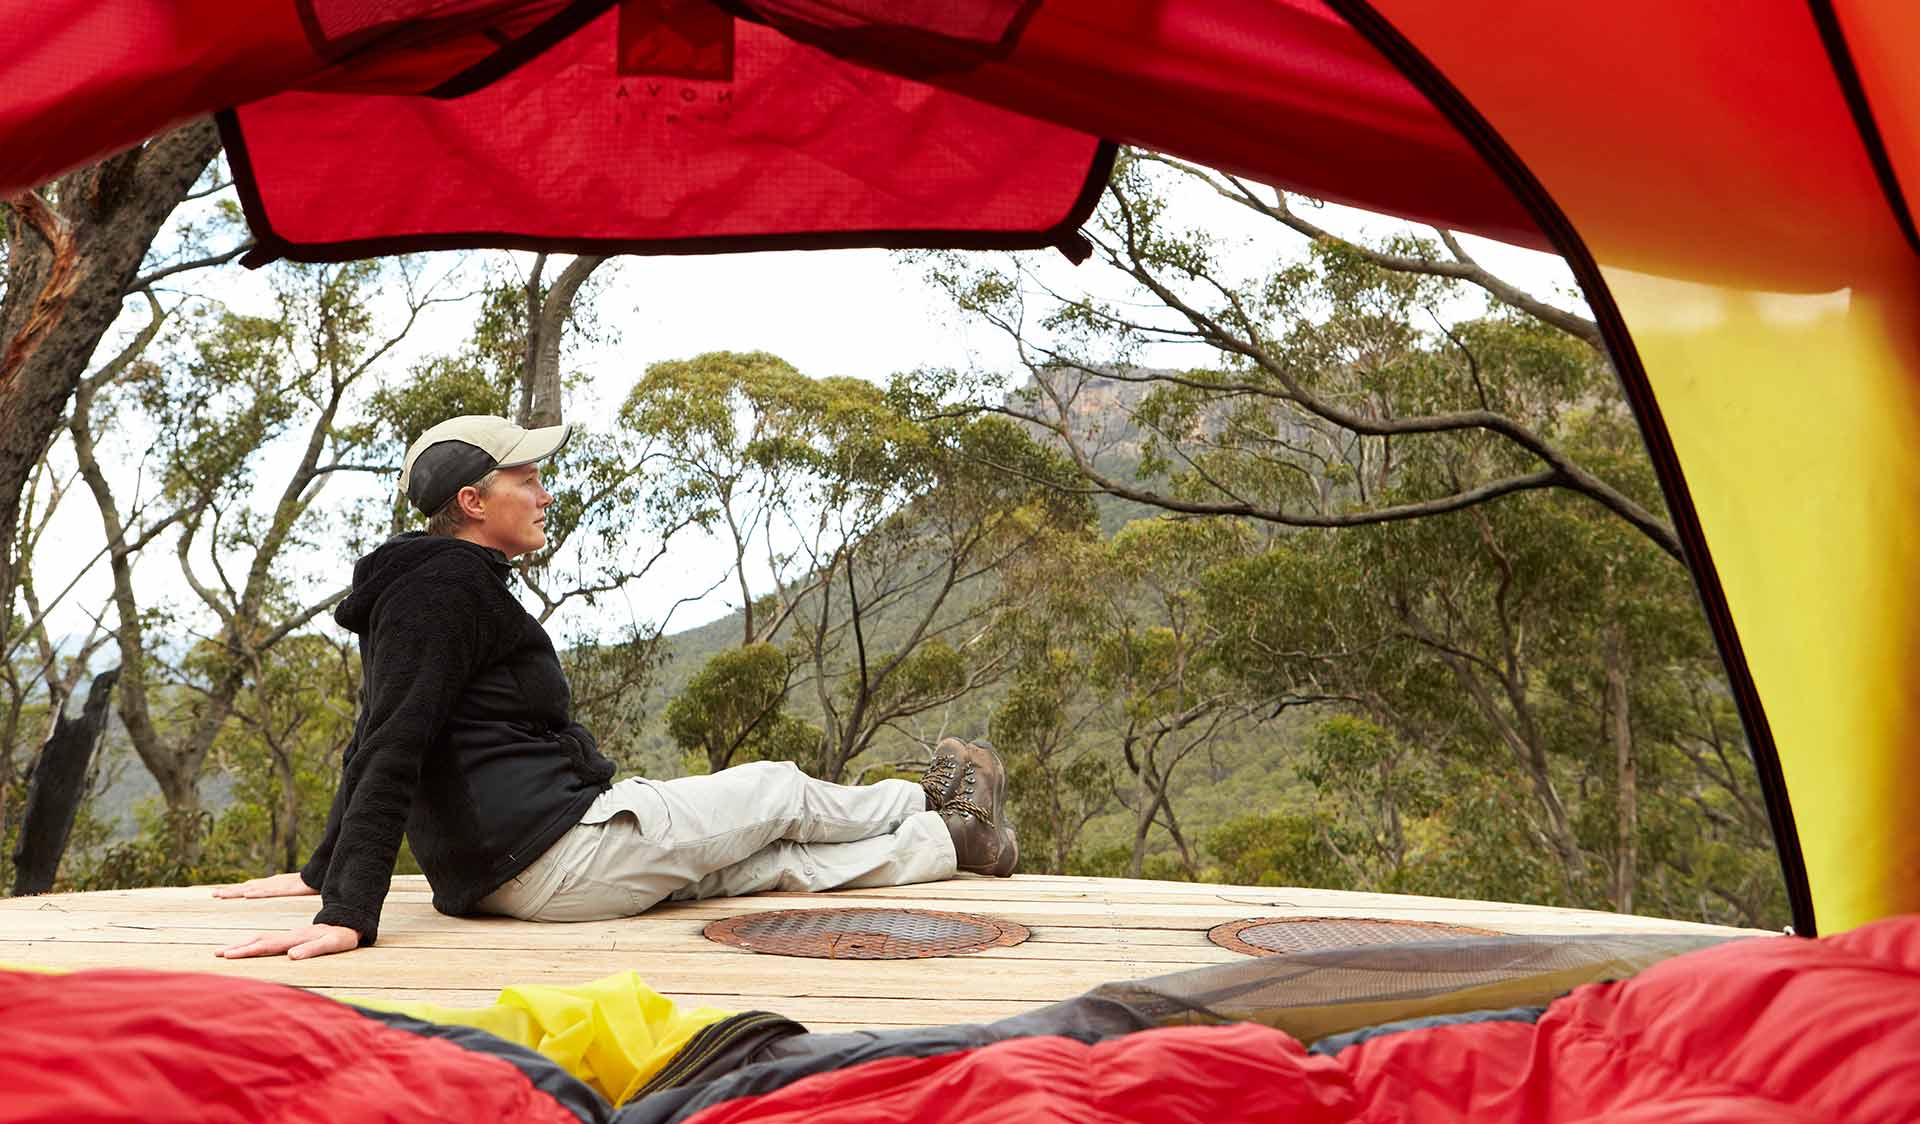 The view, from inside a tent, of a women sitting nest to a tent at Bugiga Hiker Camp on the Grampians Peaks Trail